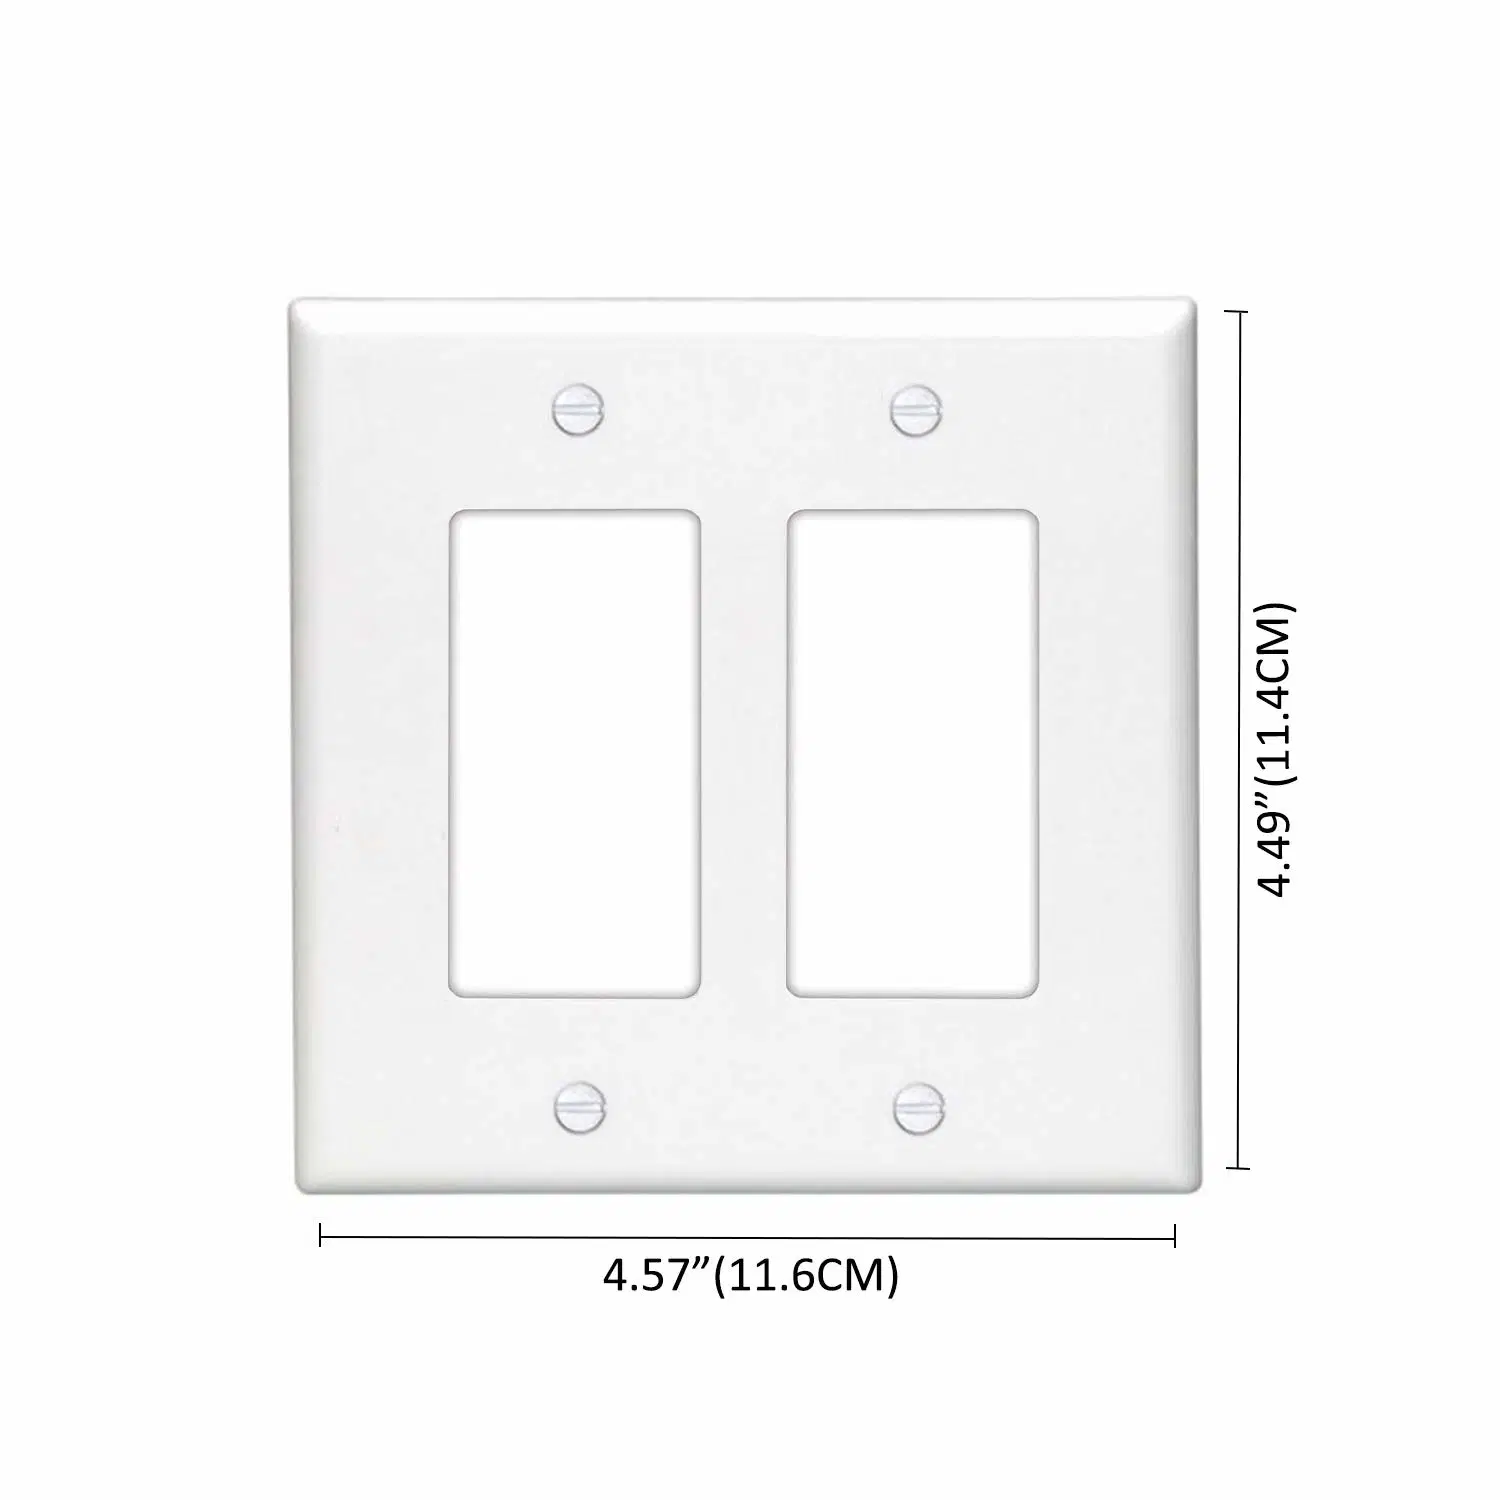 High quality/High cost performance American 2 Gang Screw Plastic Wall Plate Decorator for Gfcis/USB Charge Devices and Switches, UL Approved